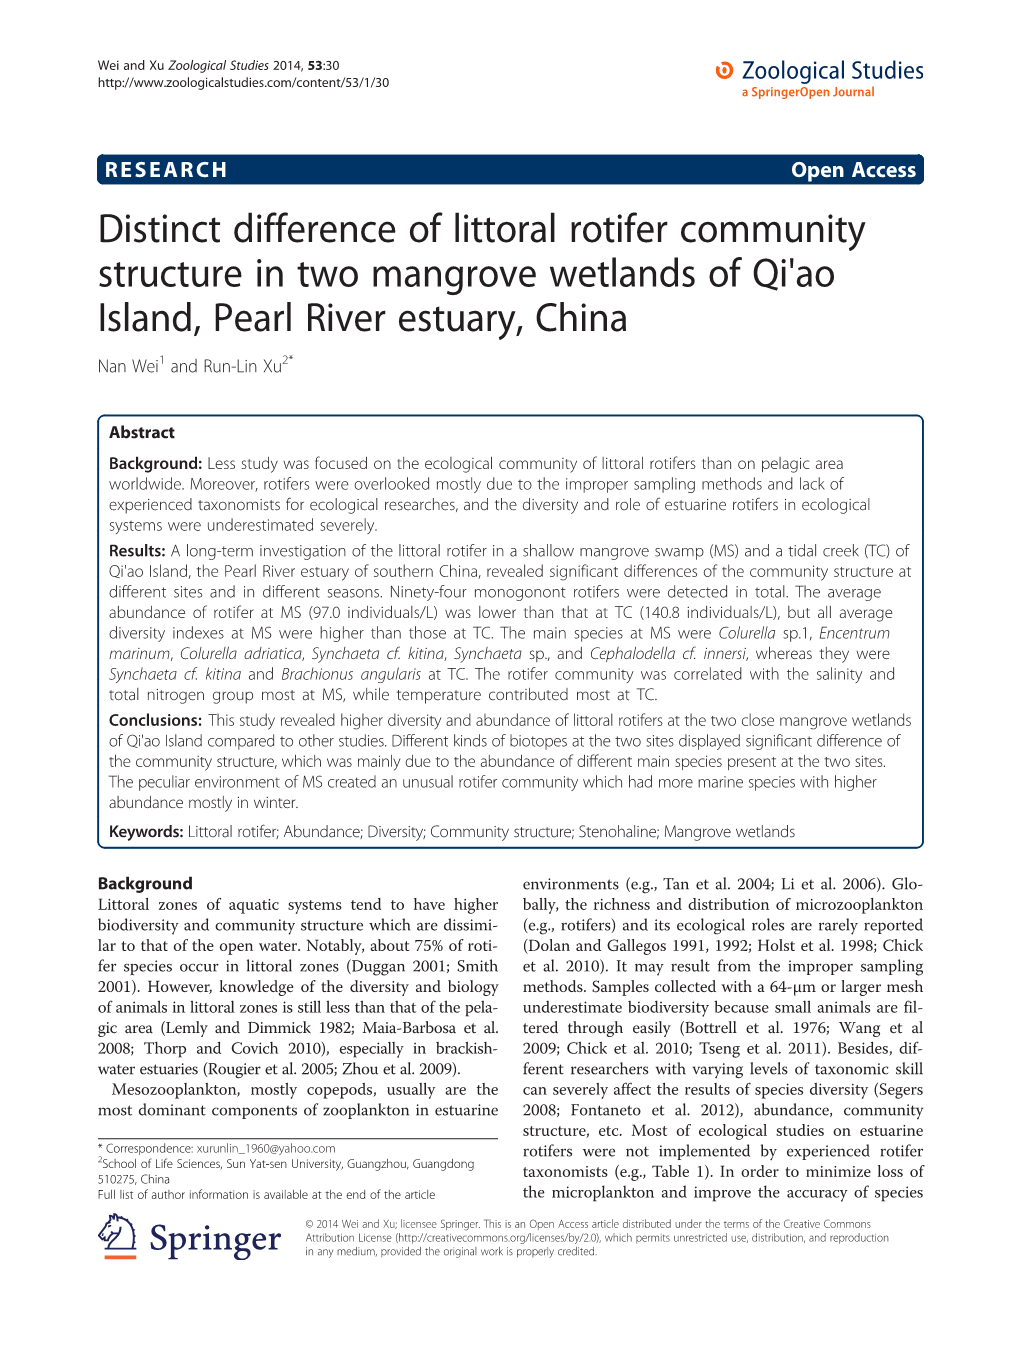 Distinct Difference of Littoral Rotifer Community Structure in Two Mangrove Wetlands of Qi'ao Island, Pearl River Estuary, China Nan Wei1 and Run-Lin Xu2*